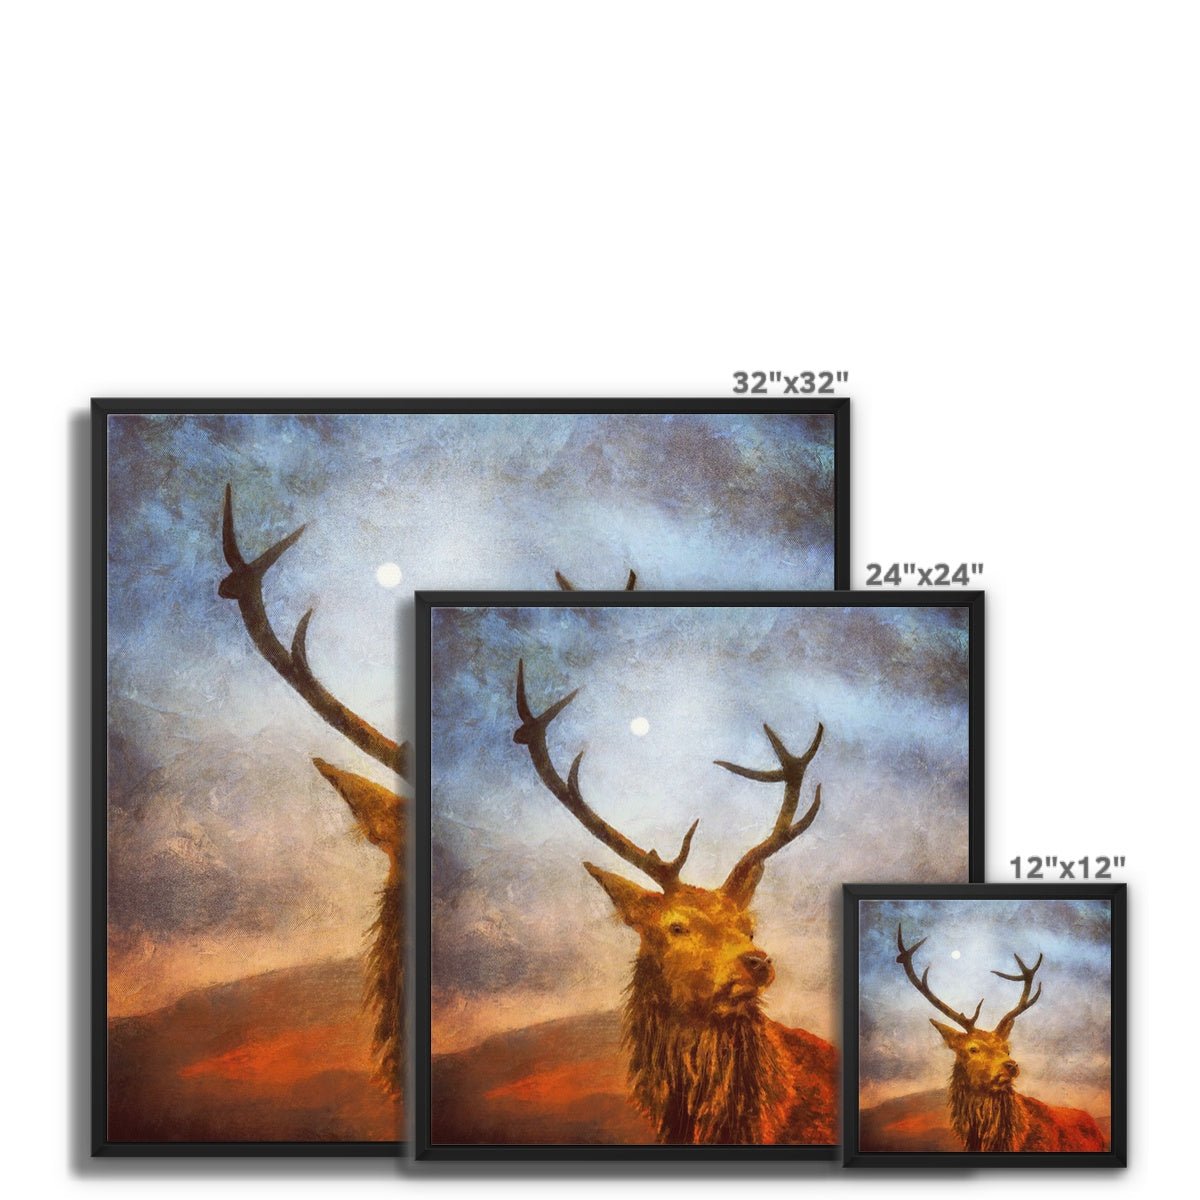 A Moonlit Highland Stag Painting | Framed Canvas From Scotland-Floating Framed Canvas Prints-Scottish Highlands & Lowlands Art Gallery-Paintings, Prints, Homeware, Art Gifts From Scotland By Scottish Artist Kevin Hunter